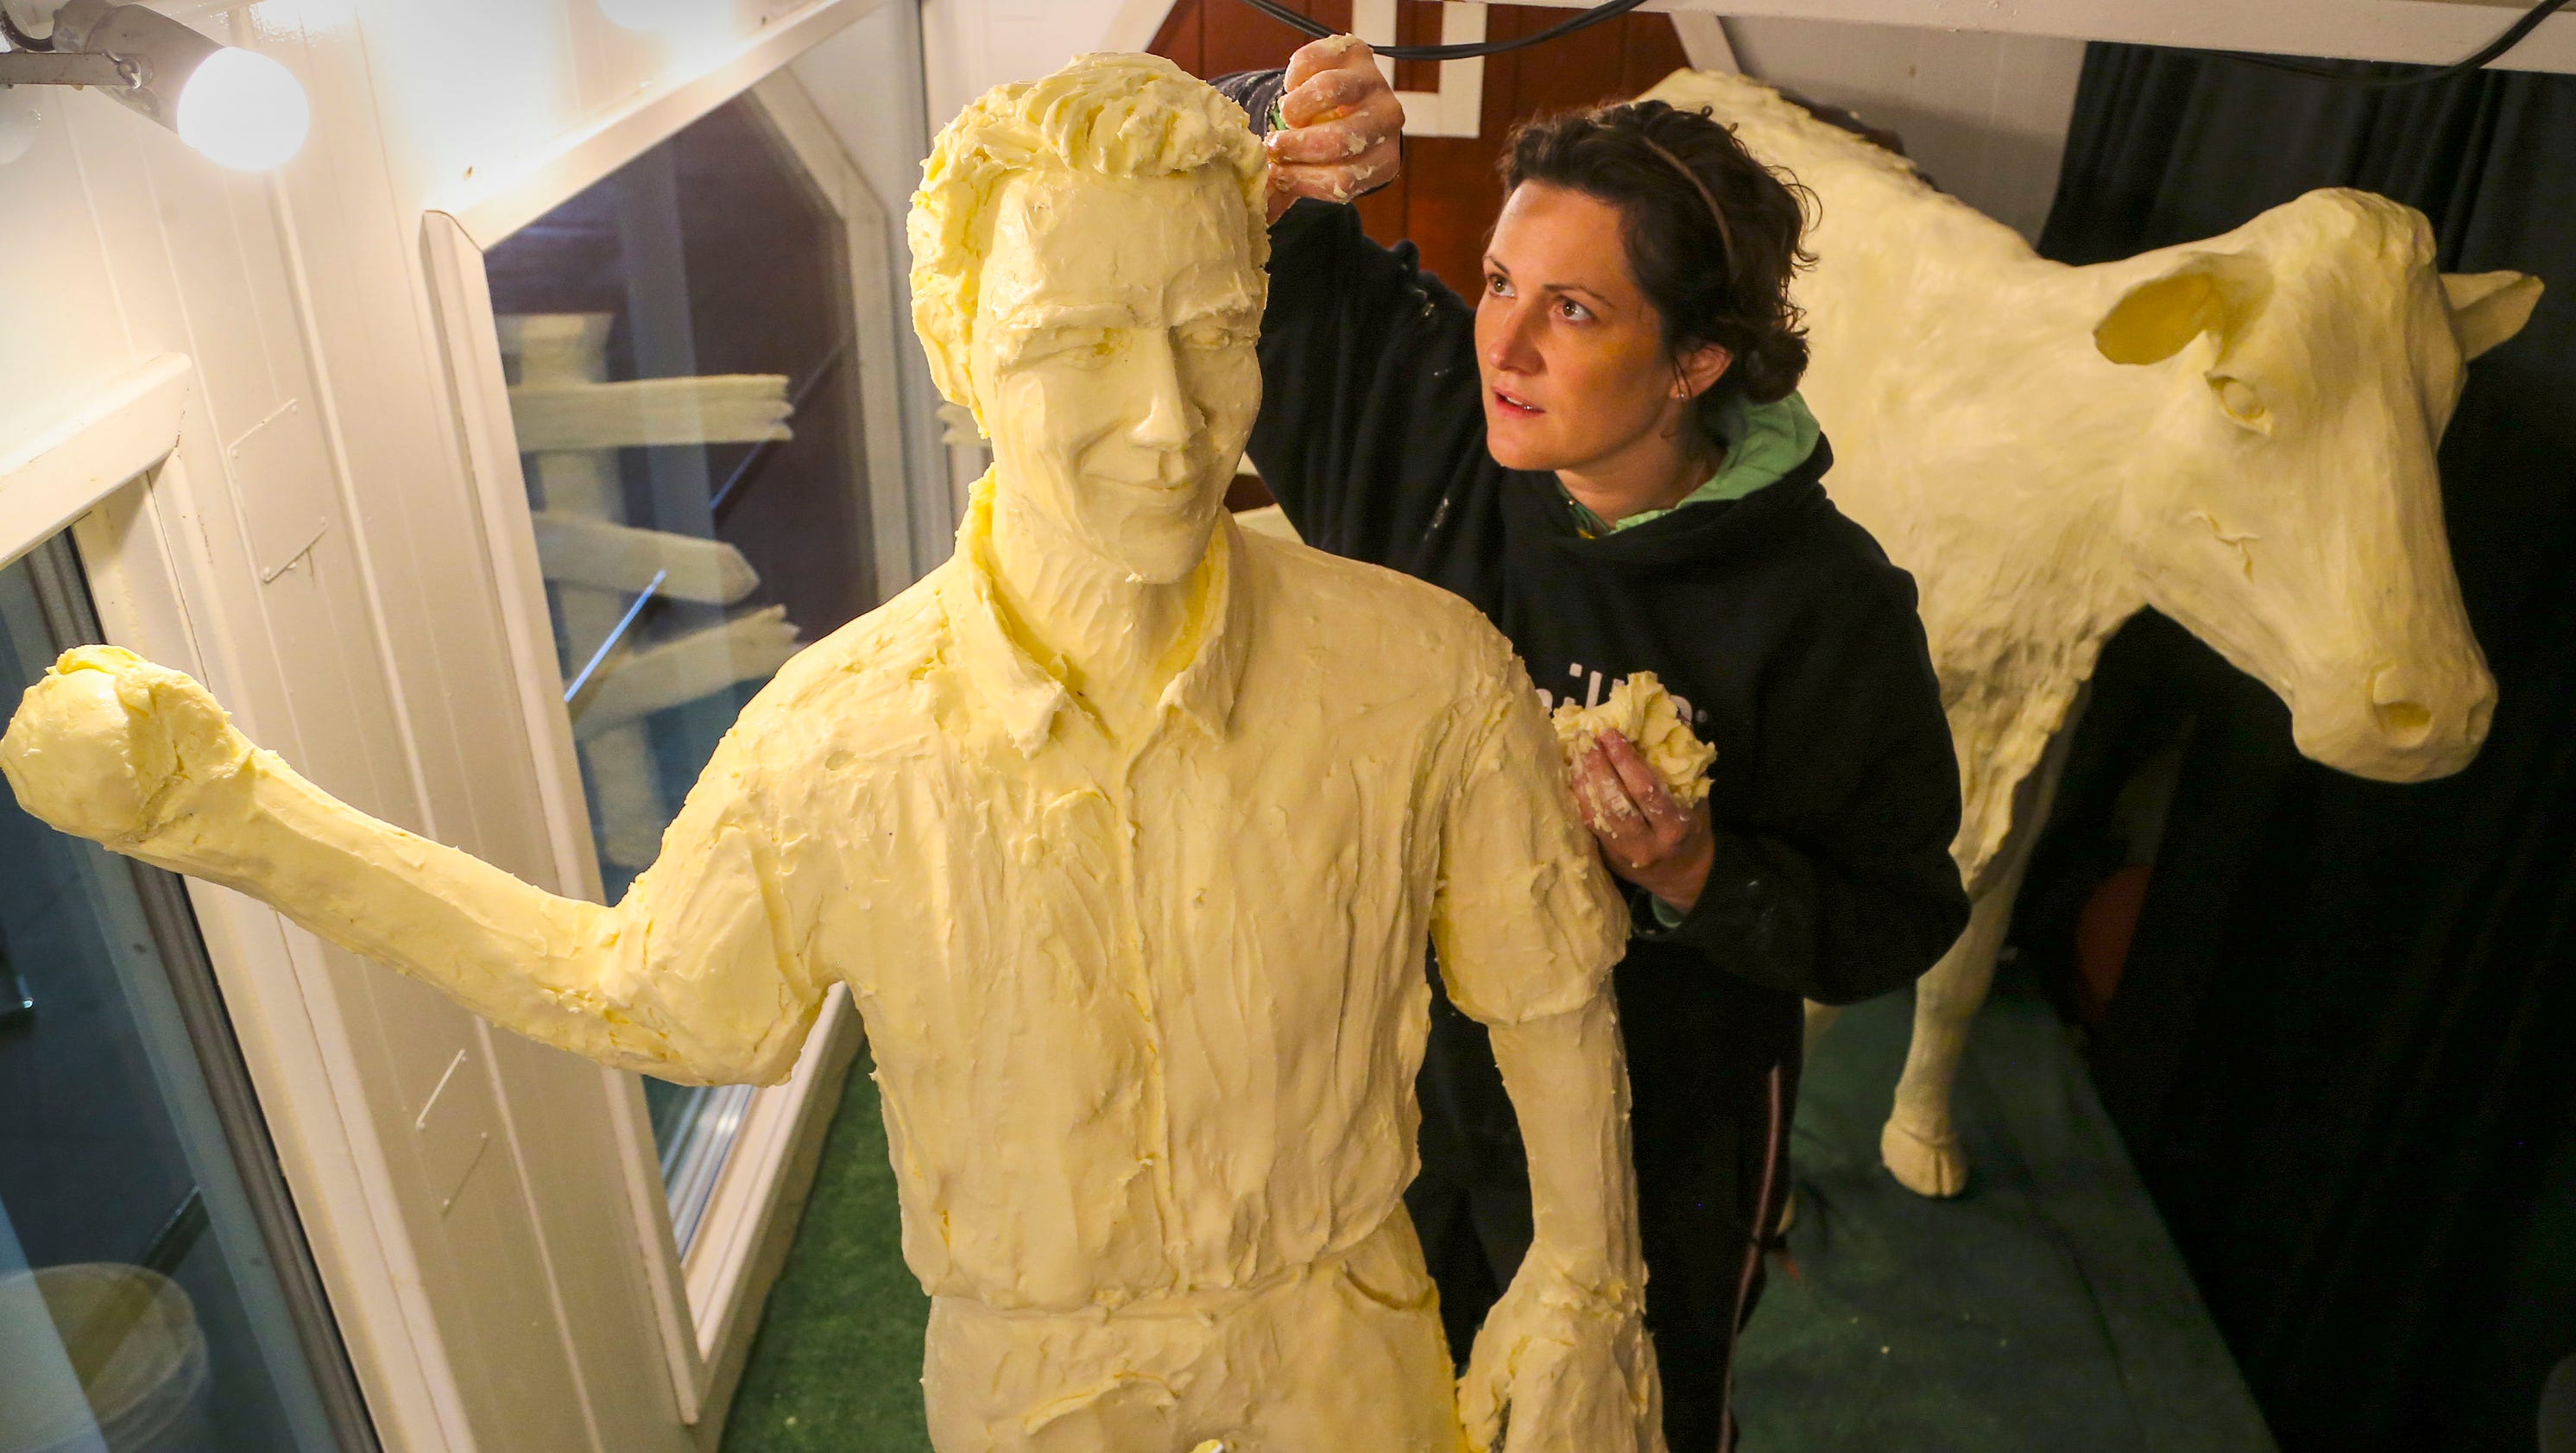 5 photos Iowa State Fair butter sculptures in the making